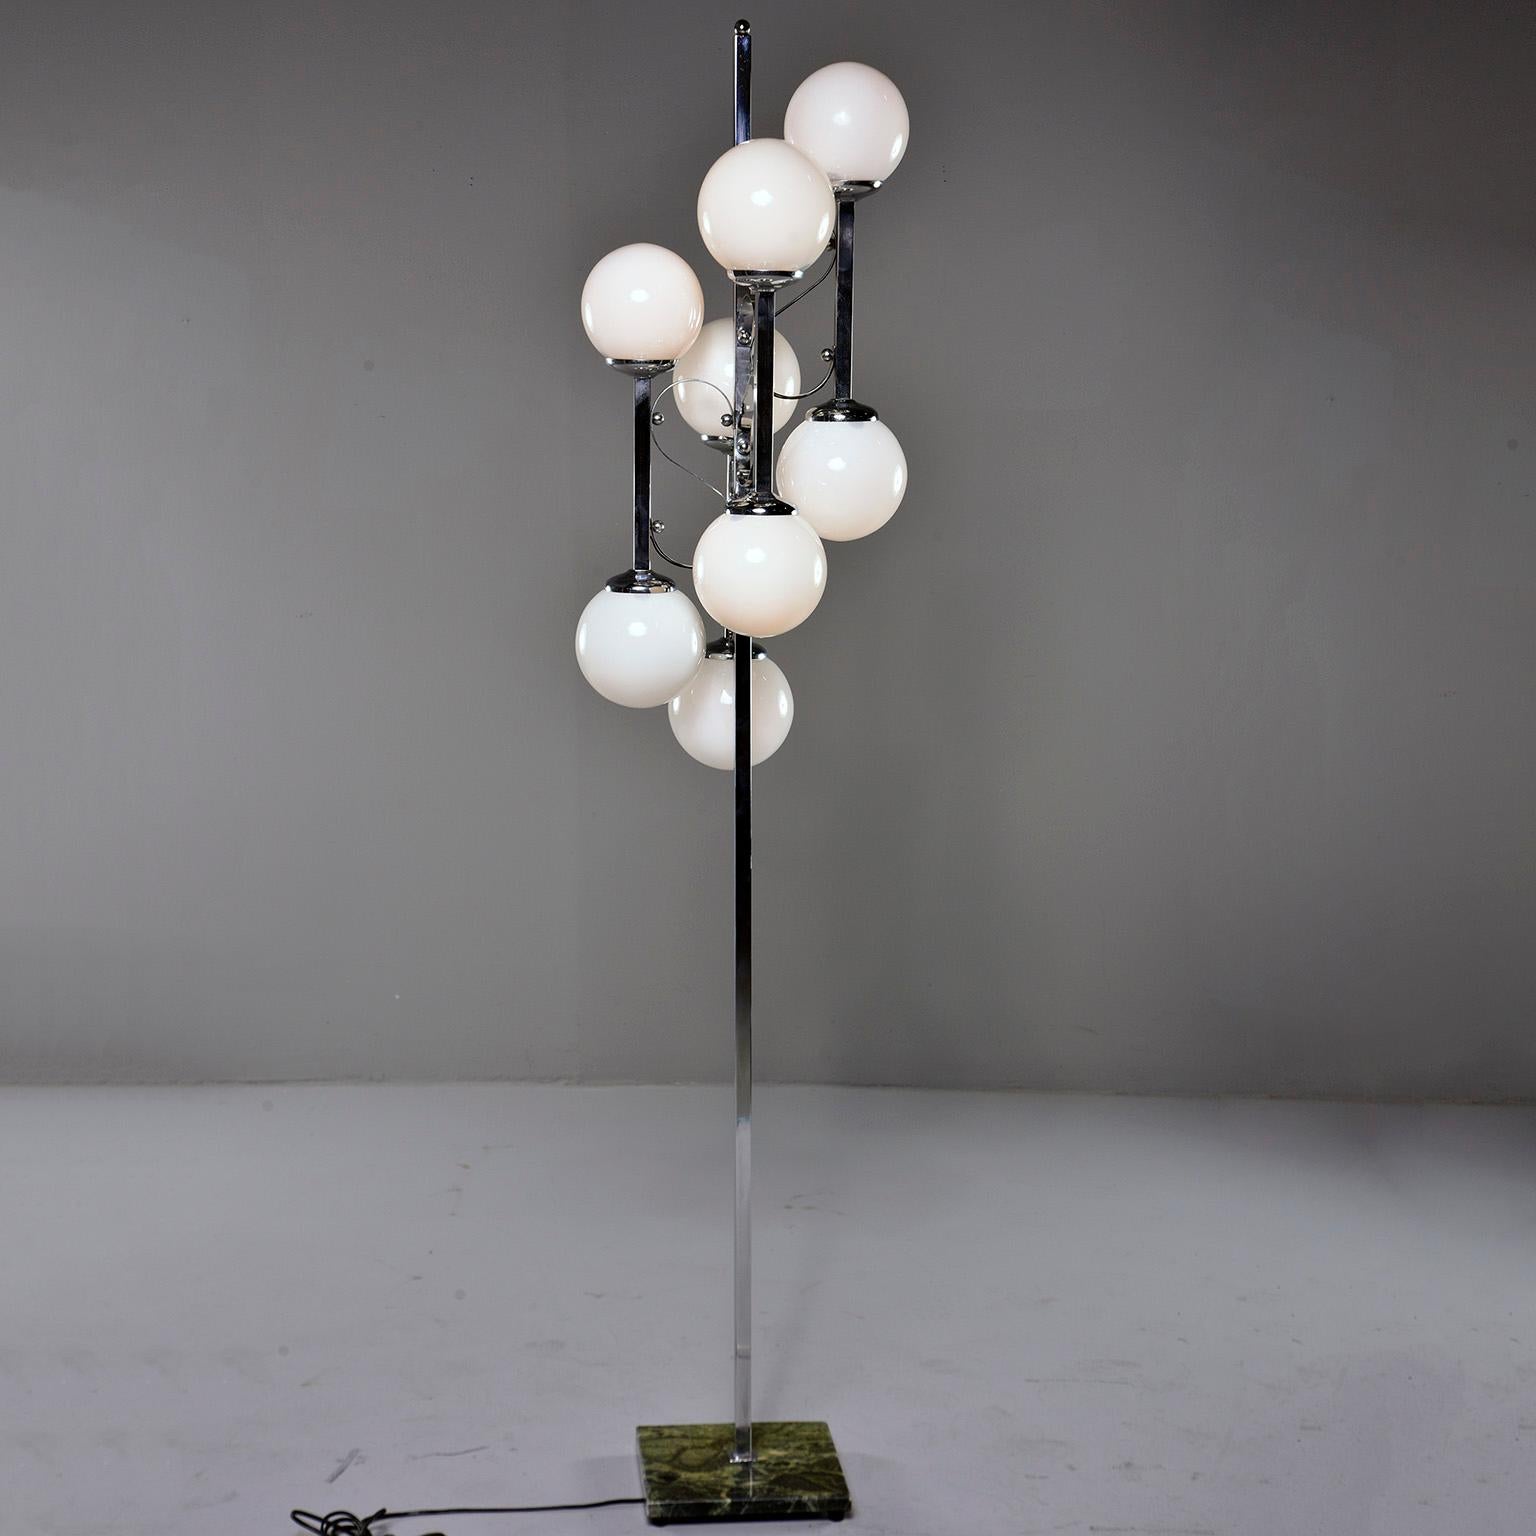 Italian floor lamp has a green marble base with polished chrome center support with four arms and eight white glass globes with candelabra sized sockets, circa 1970s. Unknown maker. New wiring for US electrical standards.